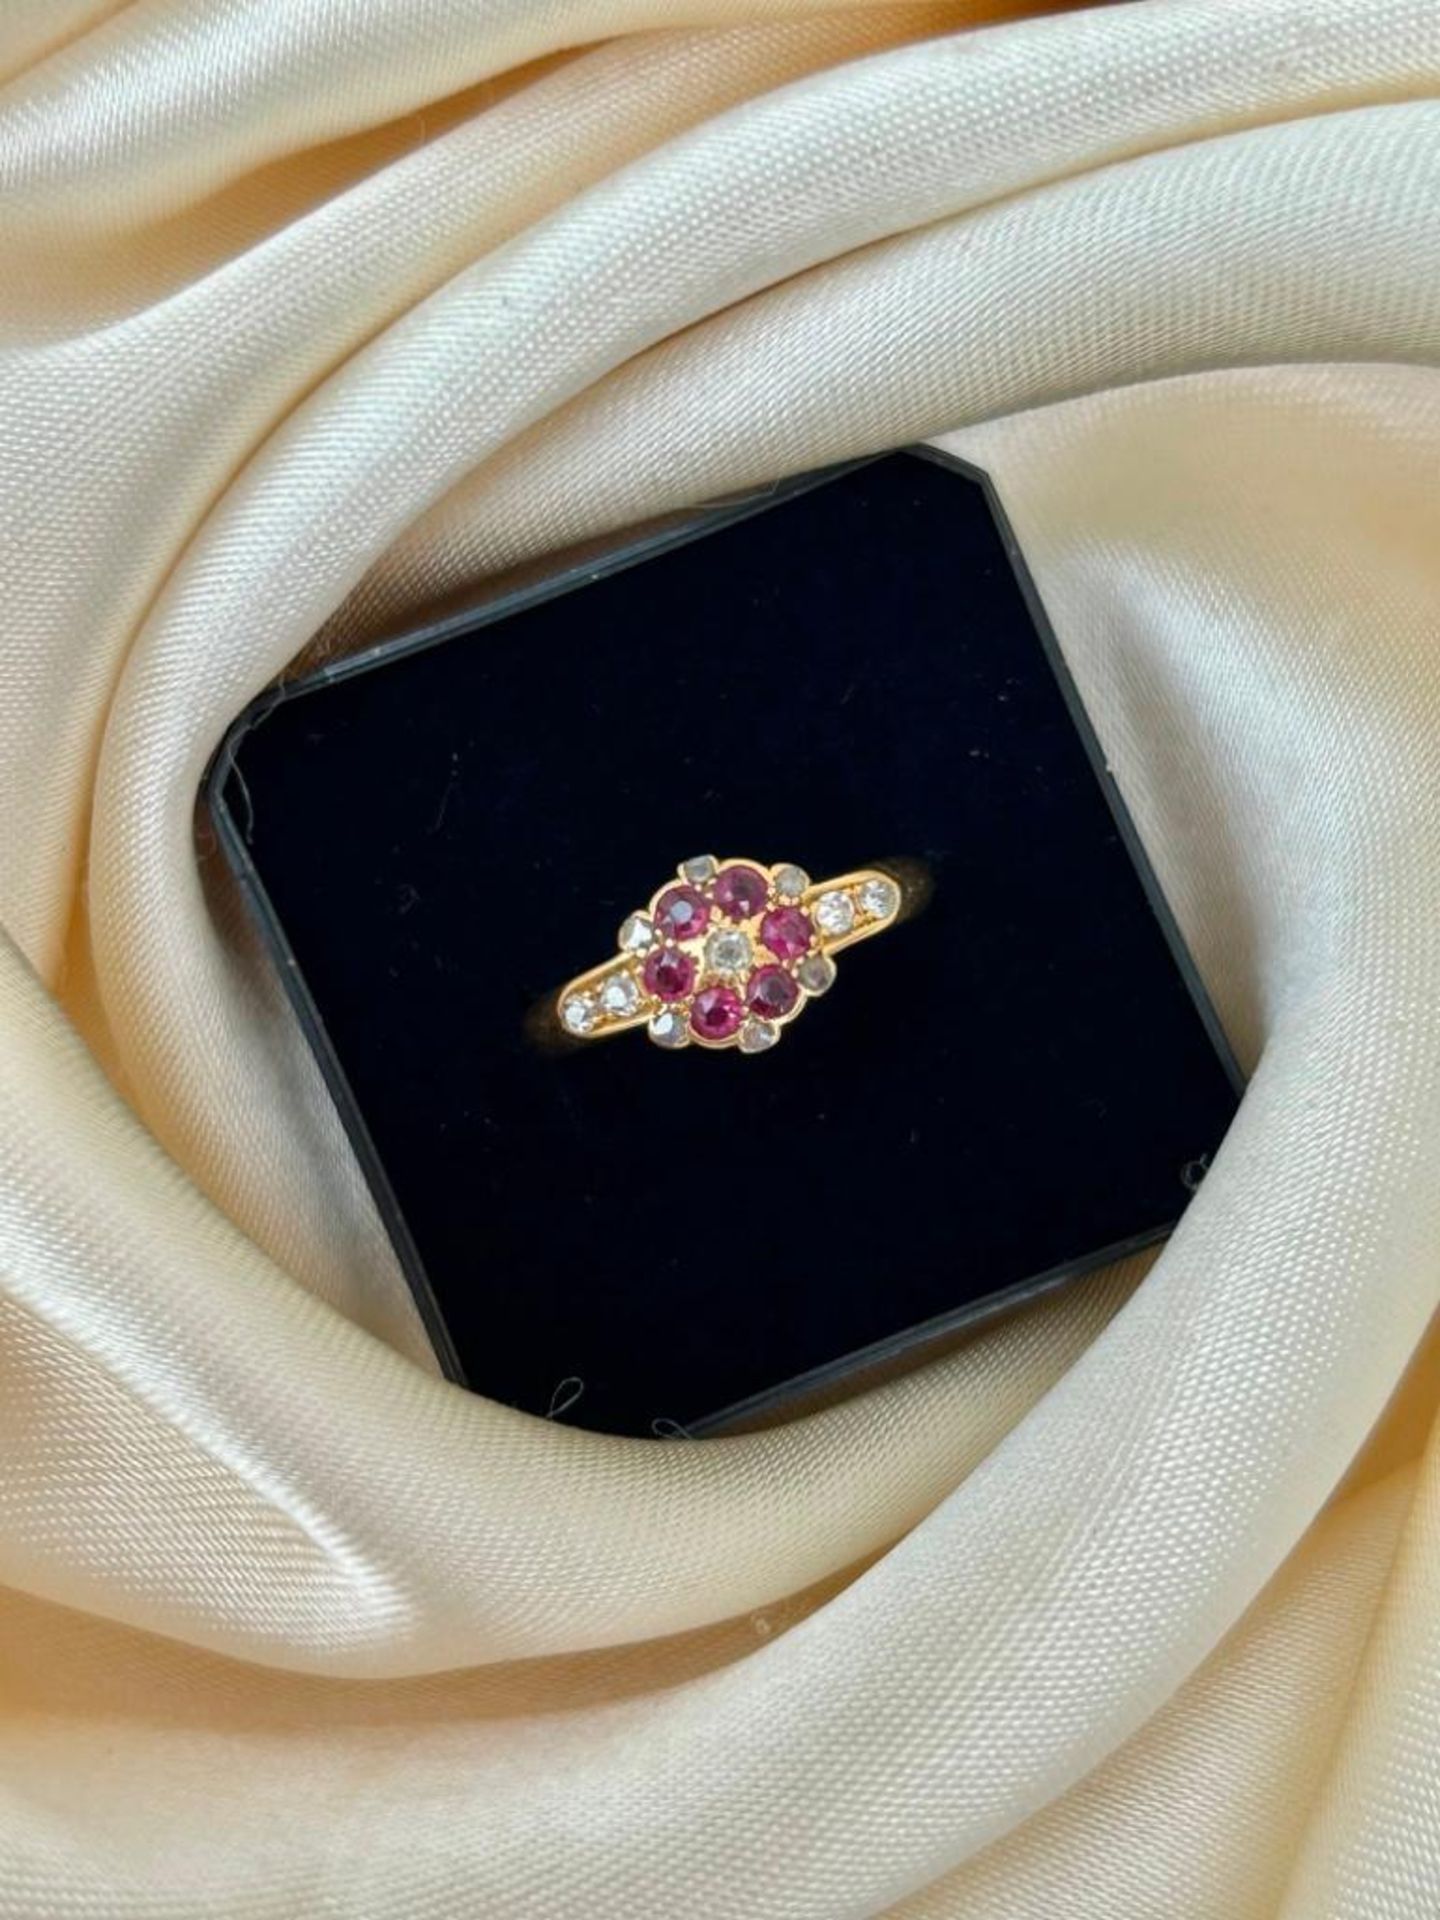 Wonderful Antique 18ct Yellow Gold Ruby and Diamond Ring - Image 4 of 6